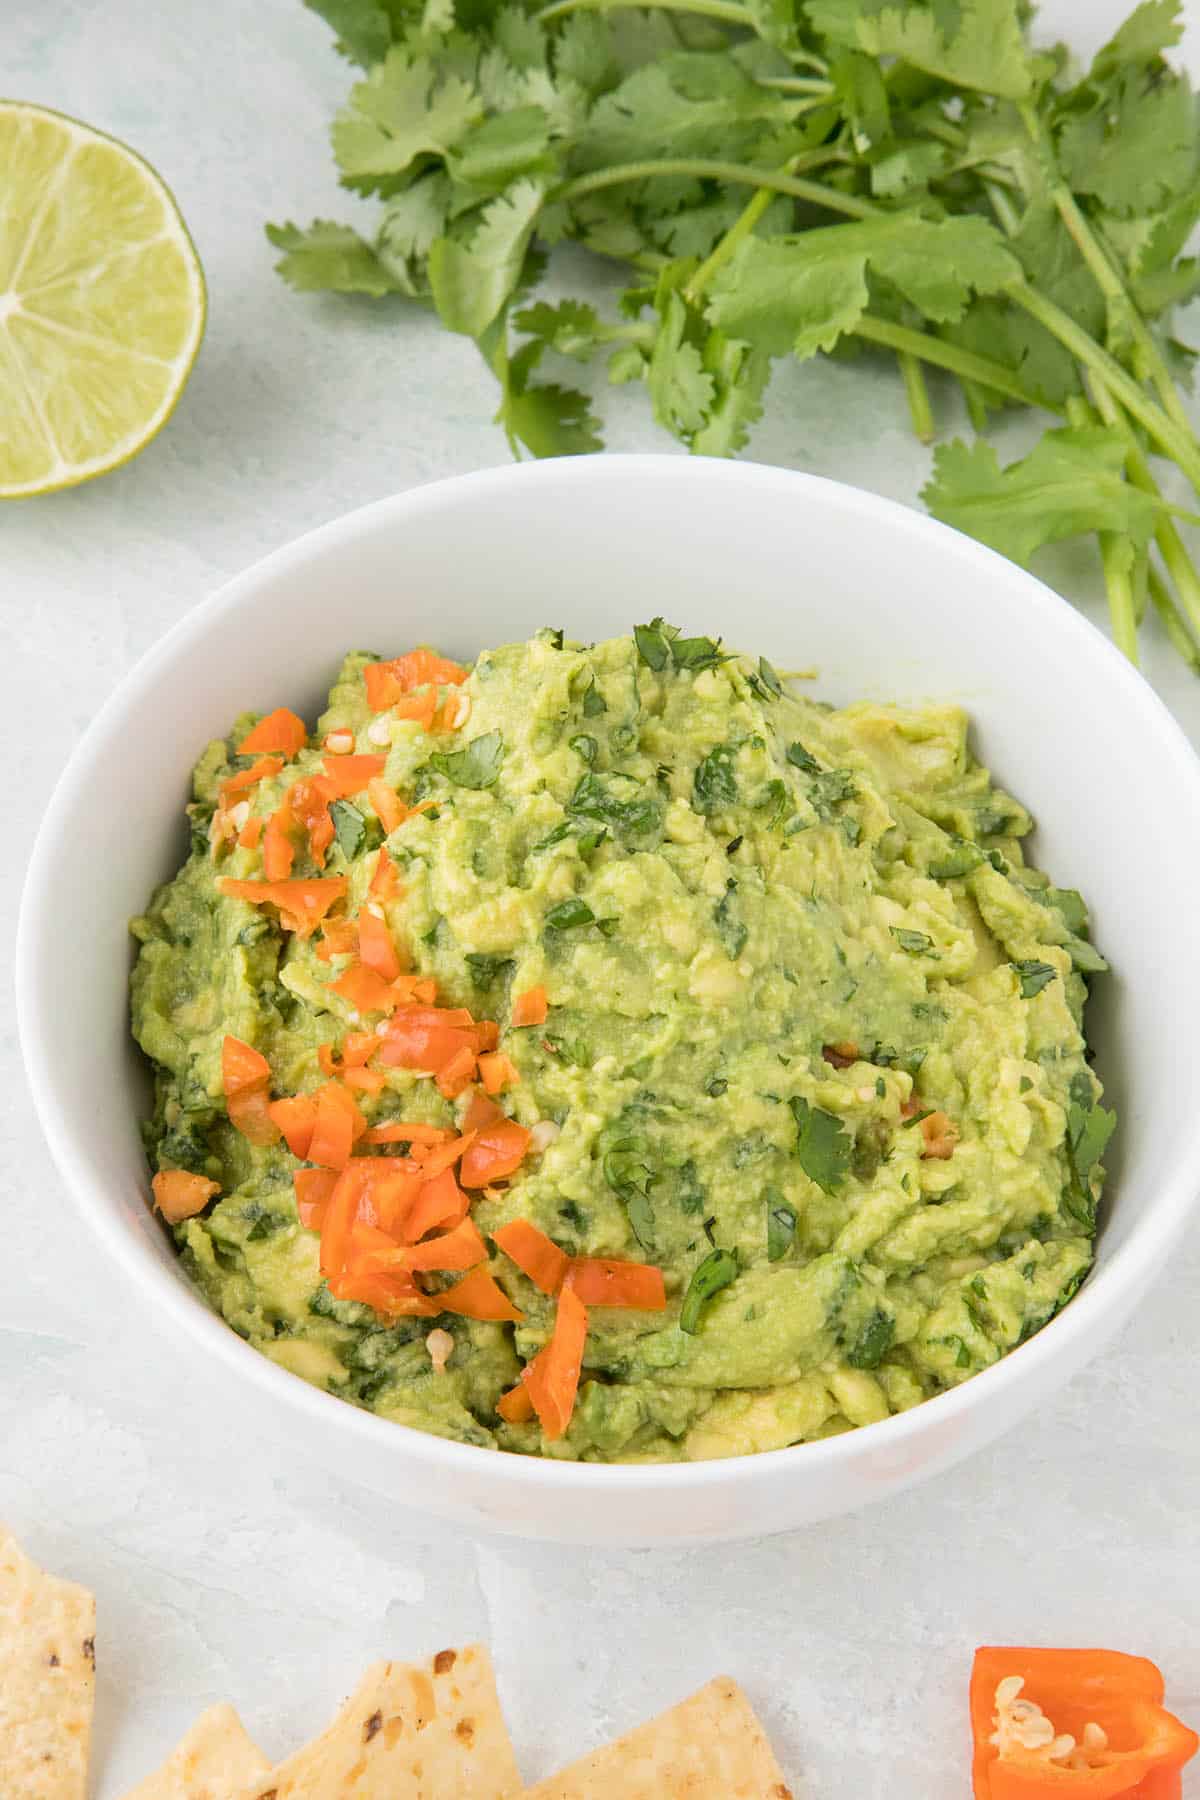 Spicy guacamole with habanero peppers in a bowl